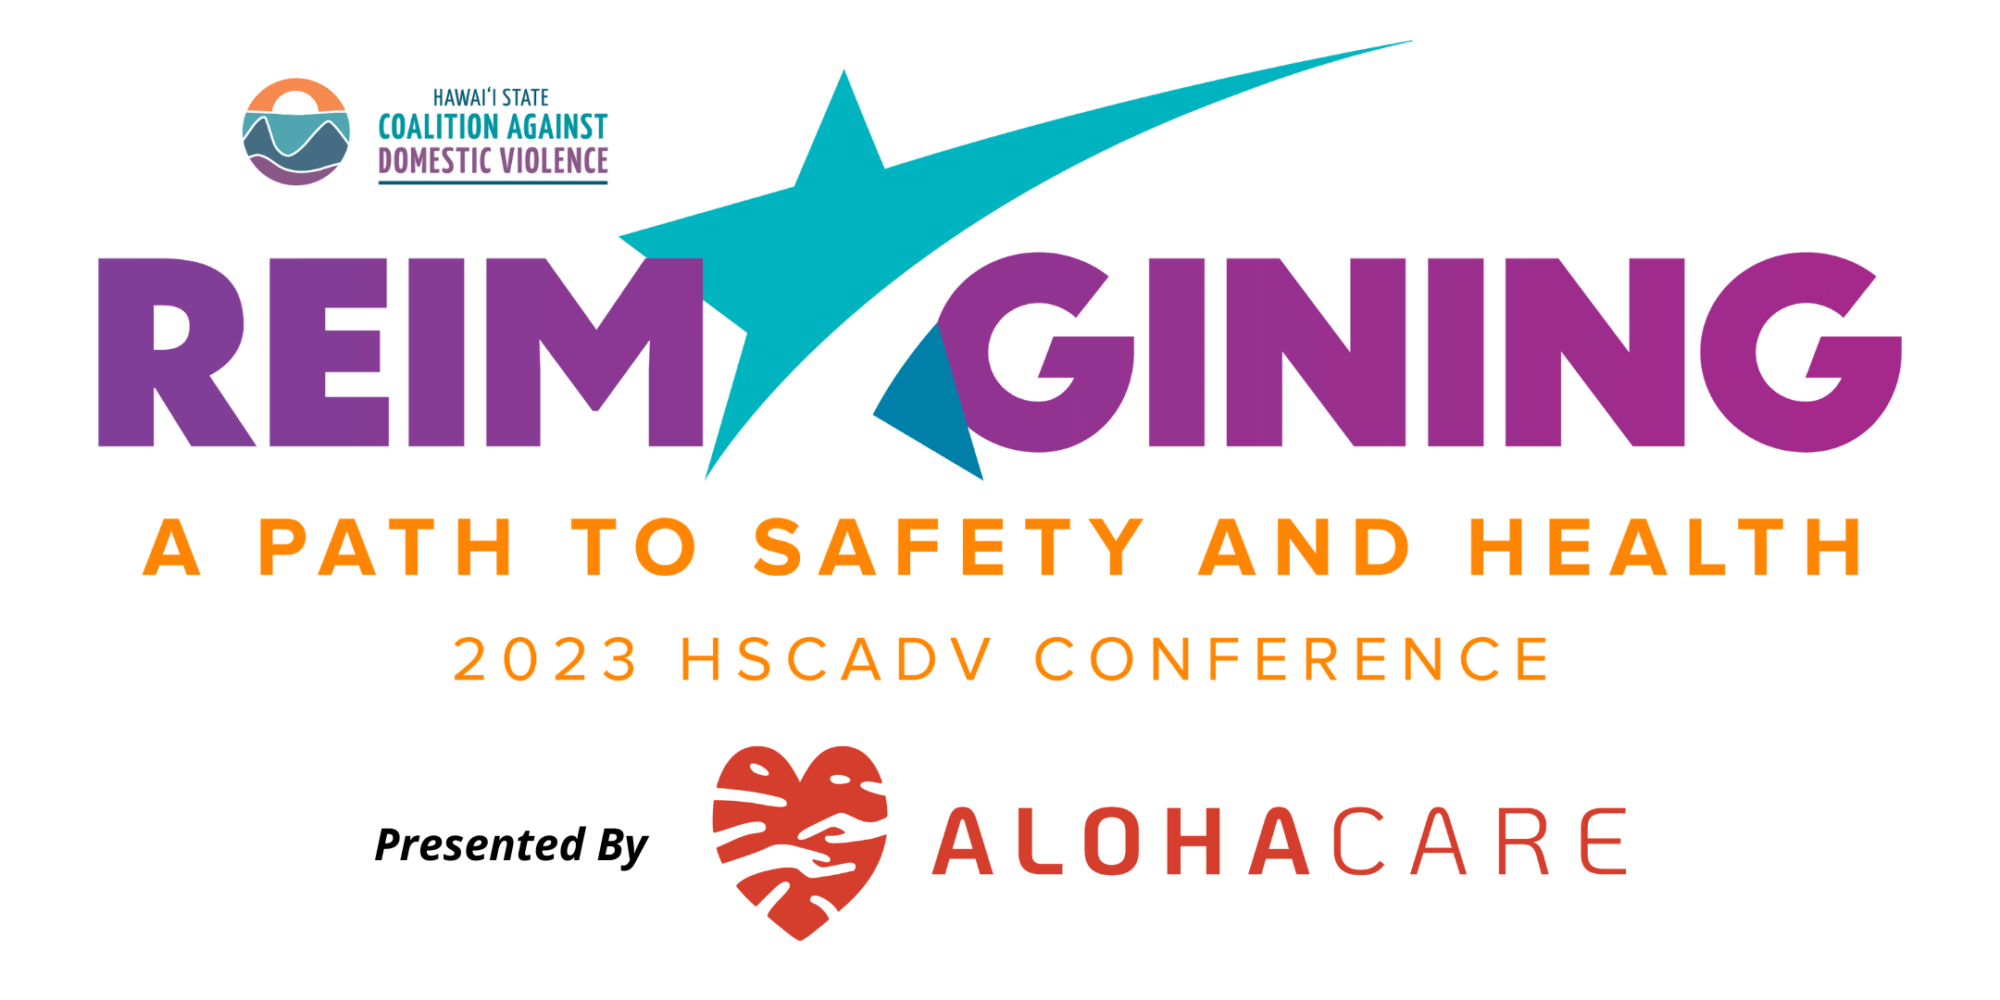 Reimaging a Path to Safety and Health 2023 Hawaii State Coalition Against Domestic Violence Conference presented by Aloha Care Flyer